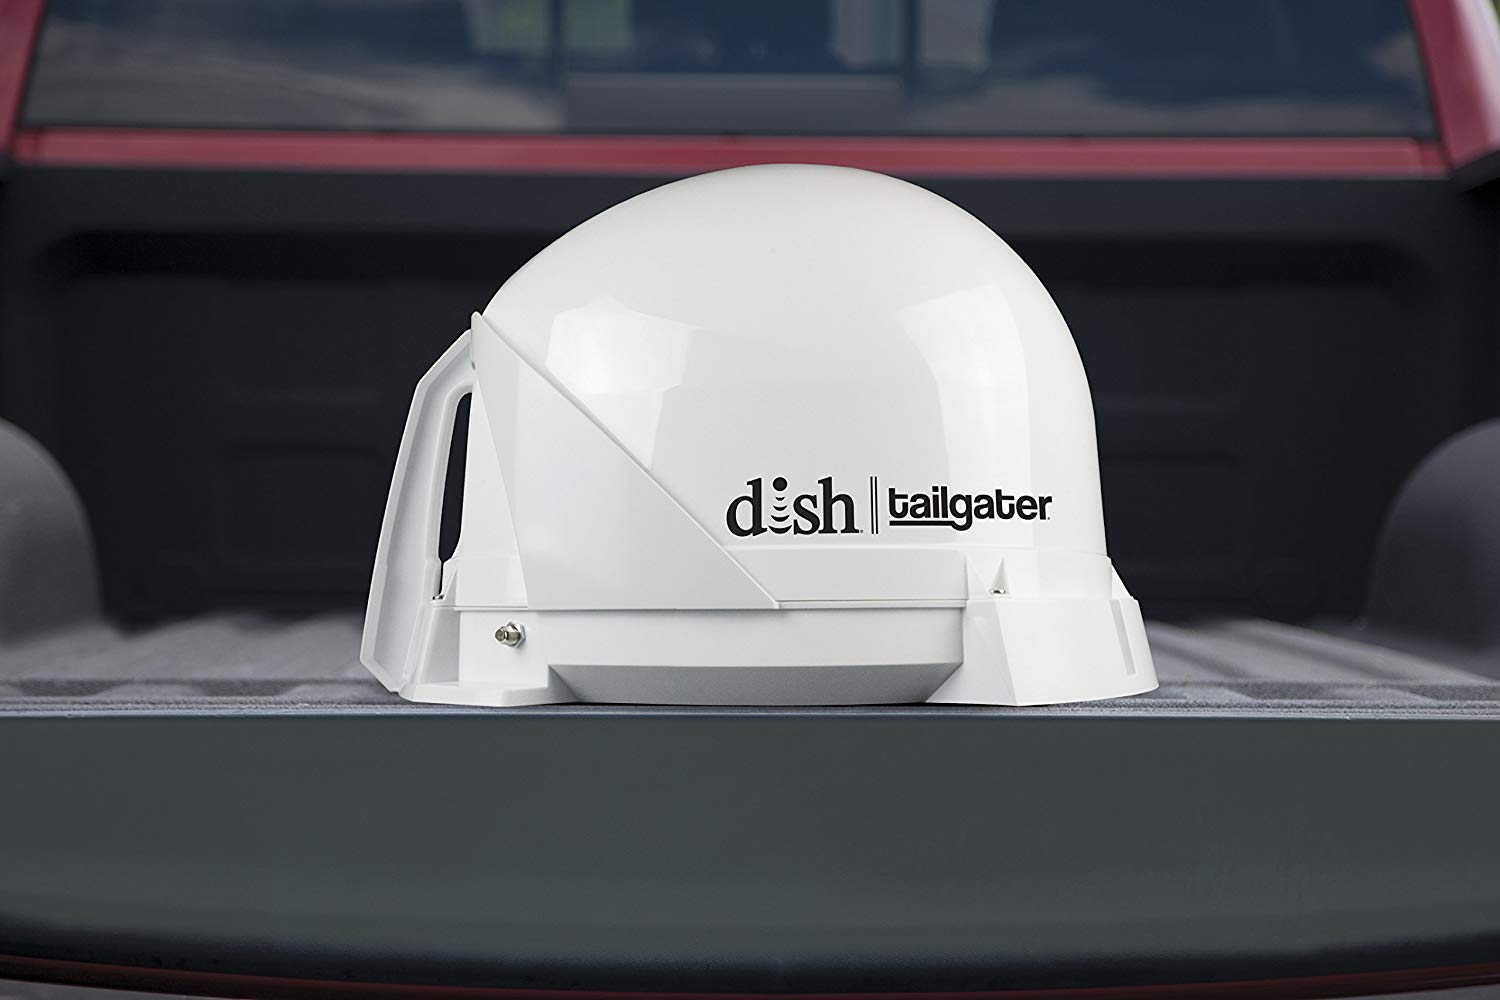 King Dish VQ4400 Tailgater Fully Automatic Portable HD RV Satellite Antenna